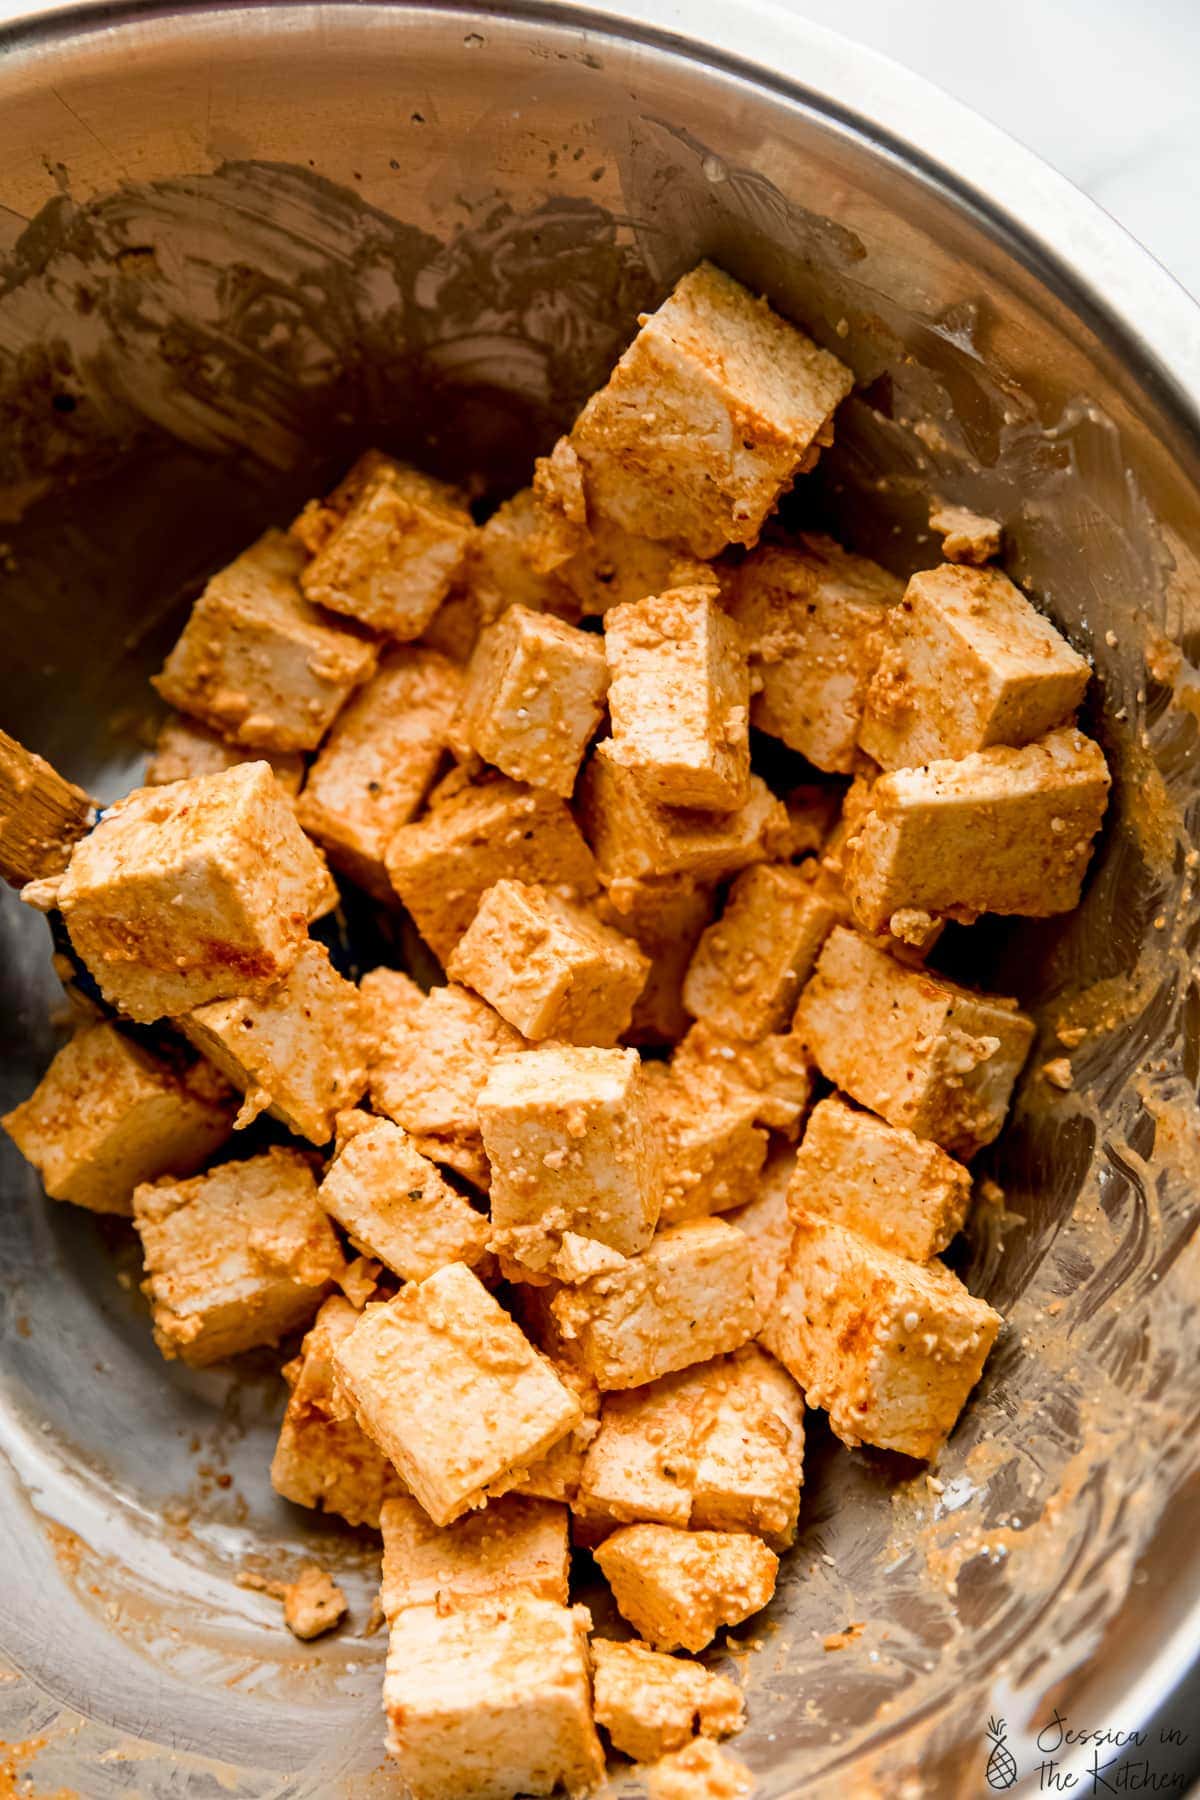 Tofu cubes in metal bowl with marinade